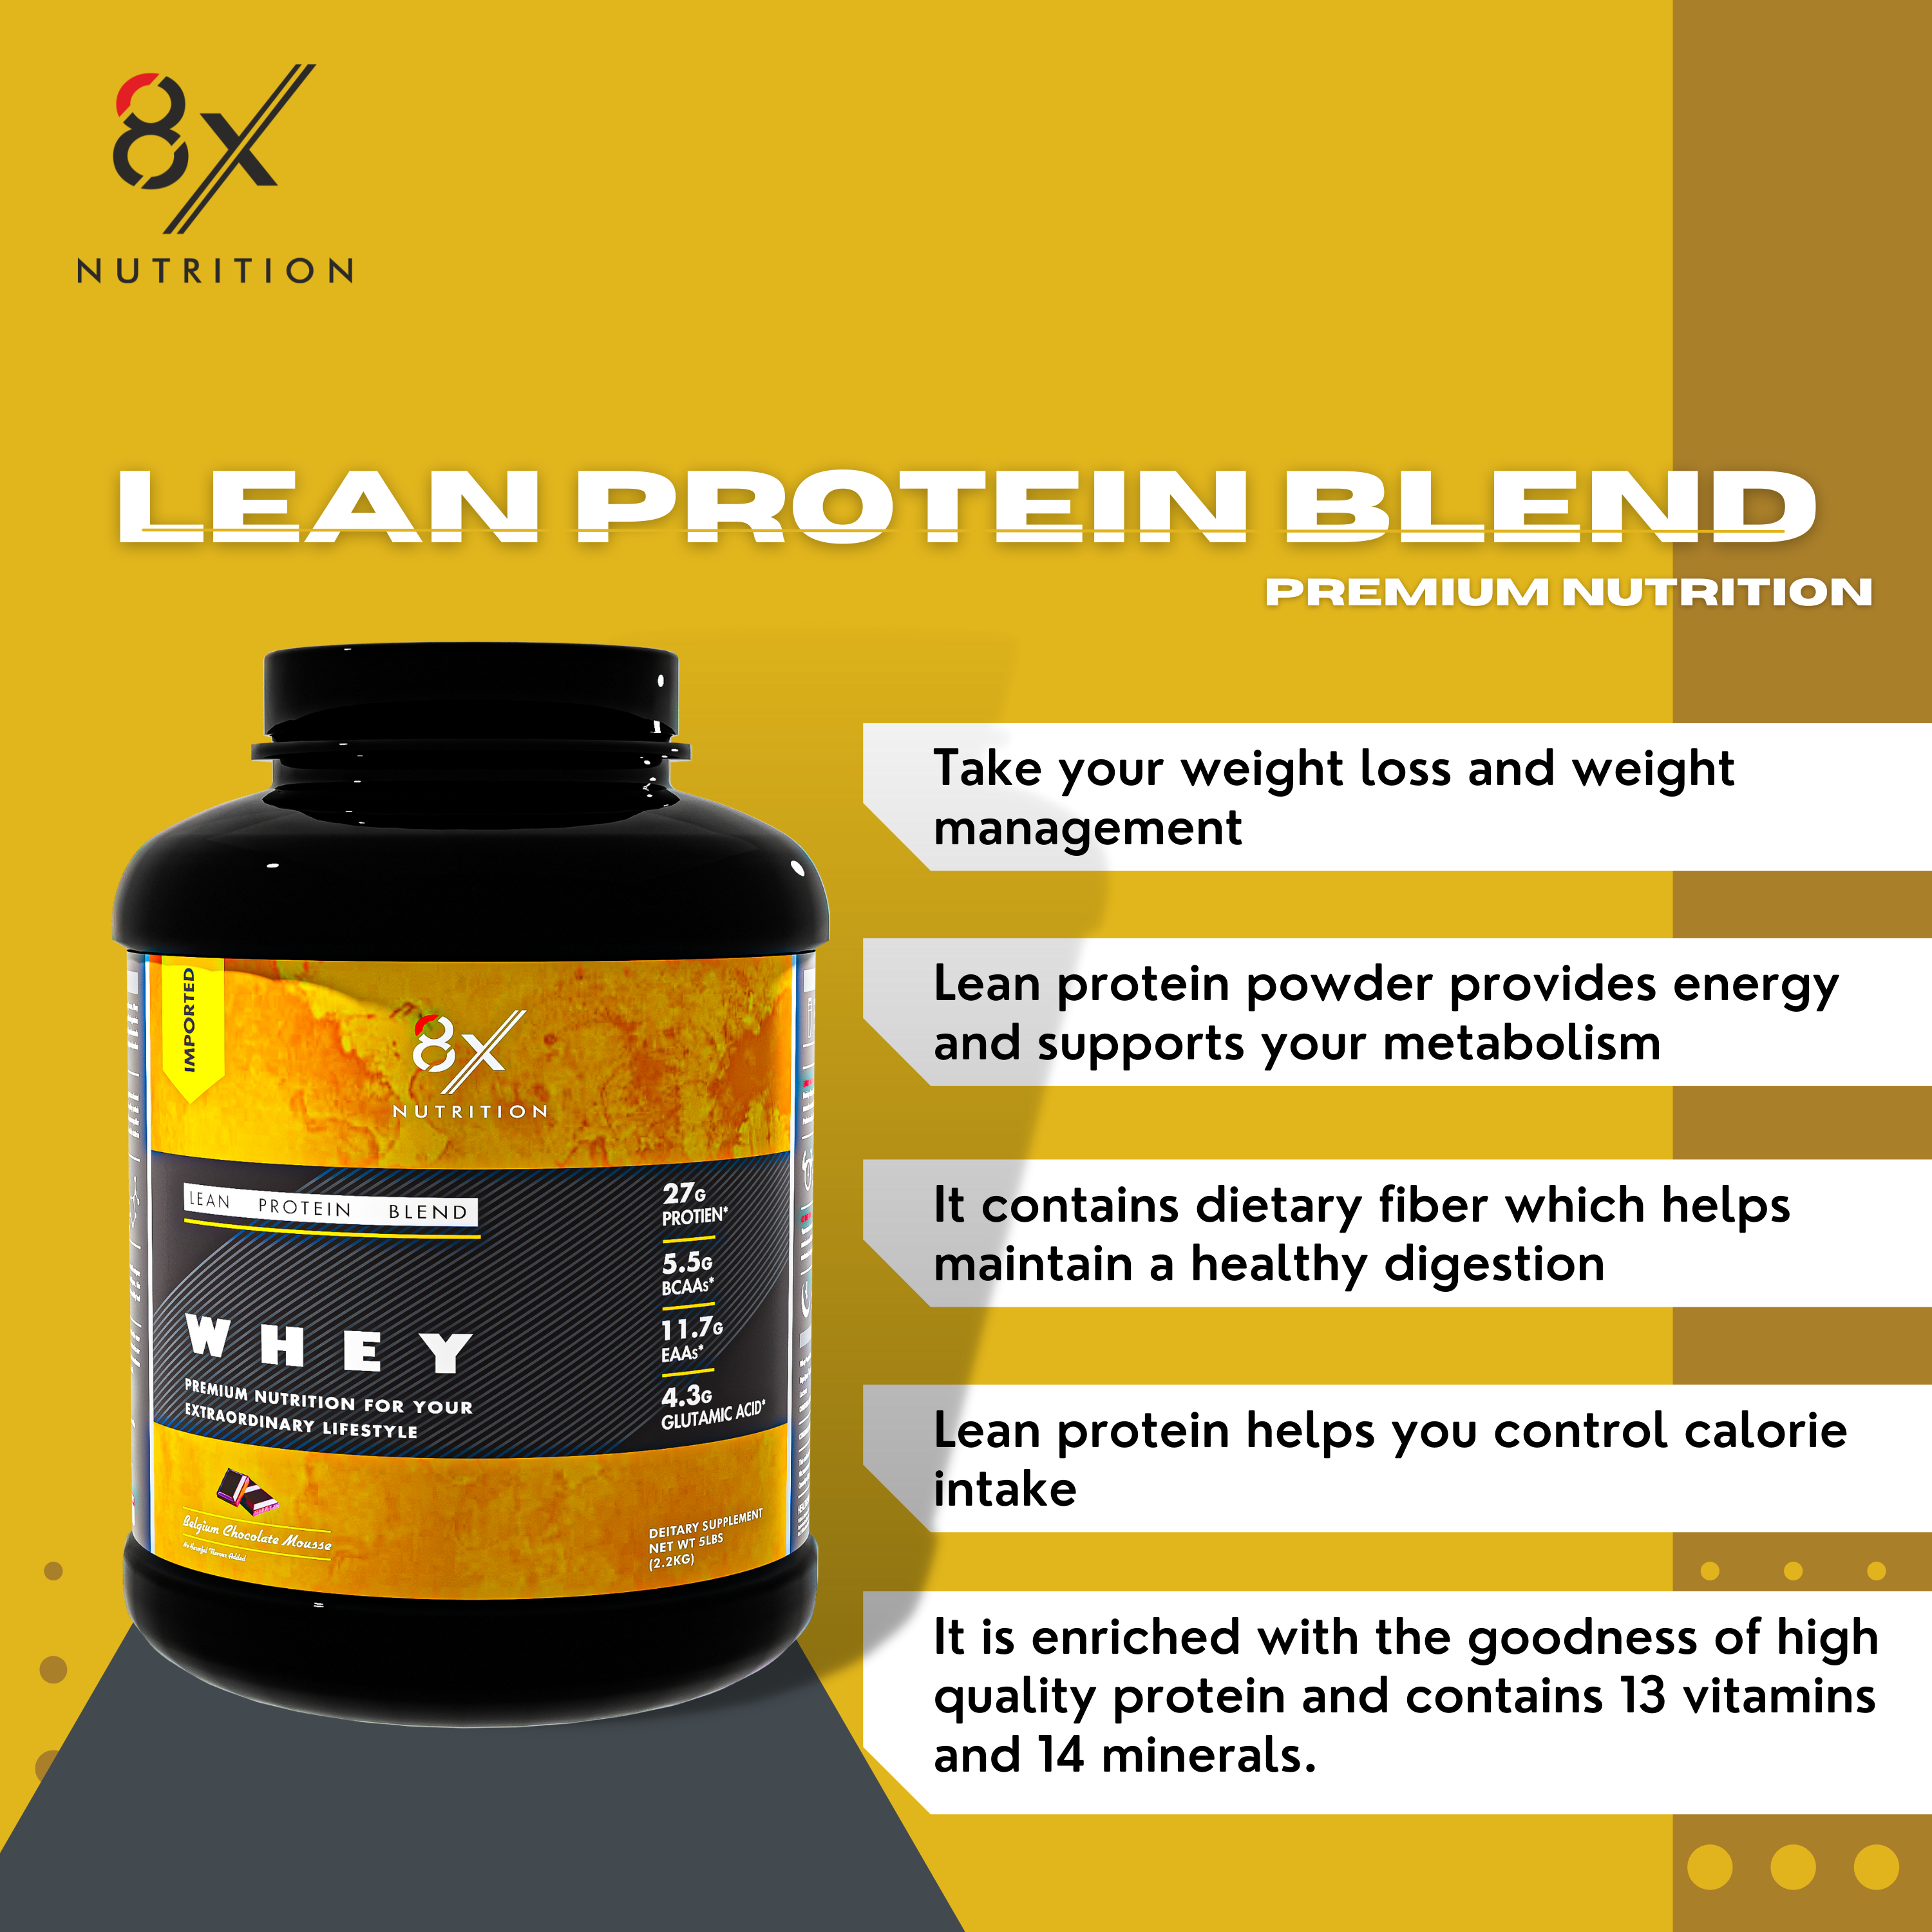 8X Nutrition Lean Protein Blend (5 LBS) - BELGIUM CHOCOLATE MOUSSE